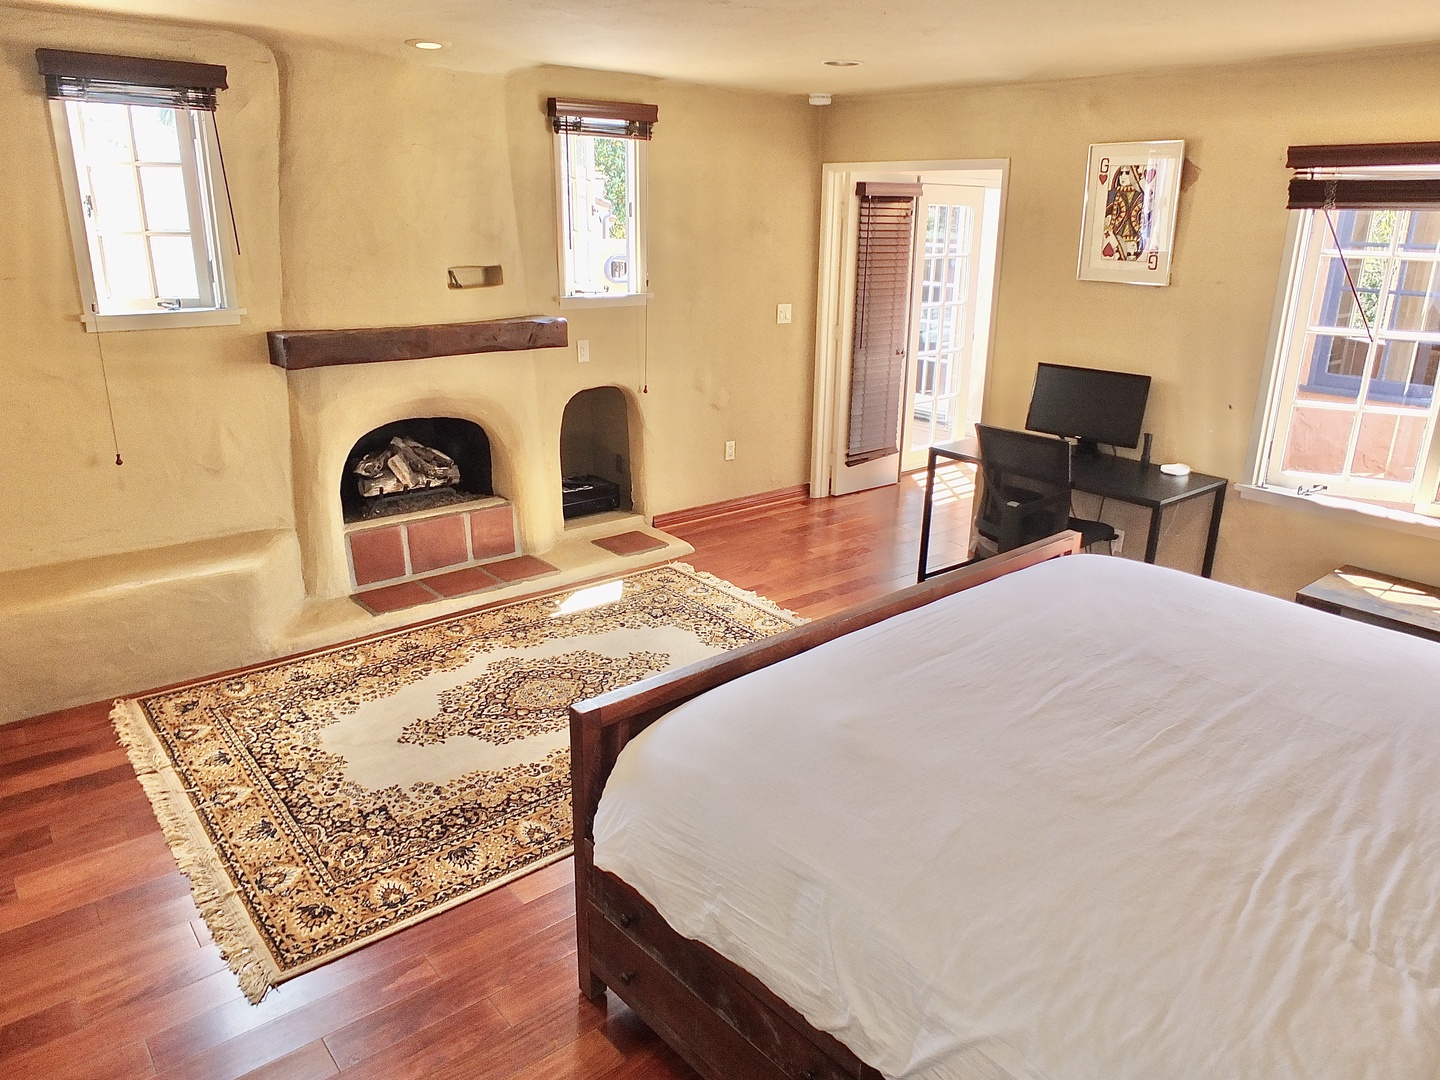 The spacious 2nd floor bedroom offers a king bed, deck access, & private en suite